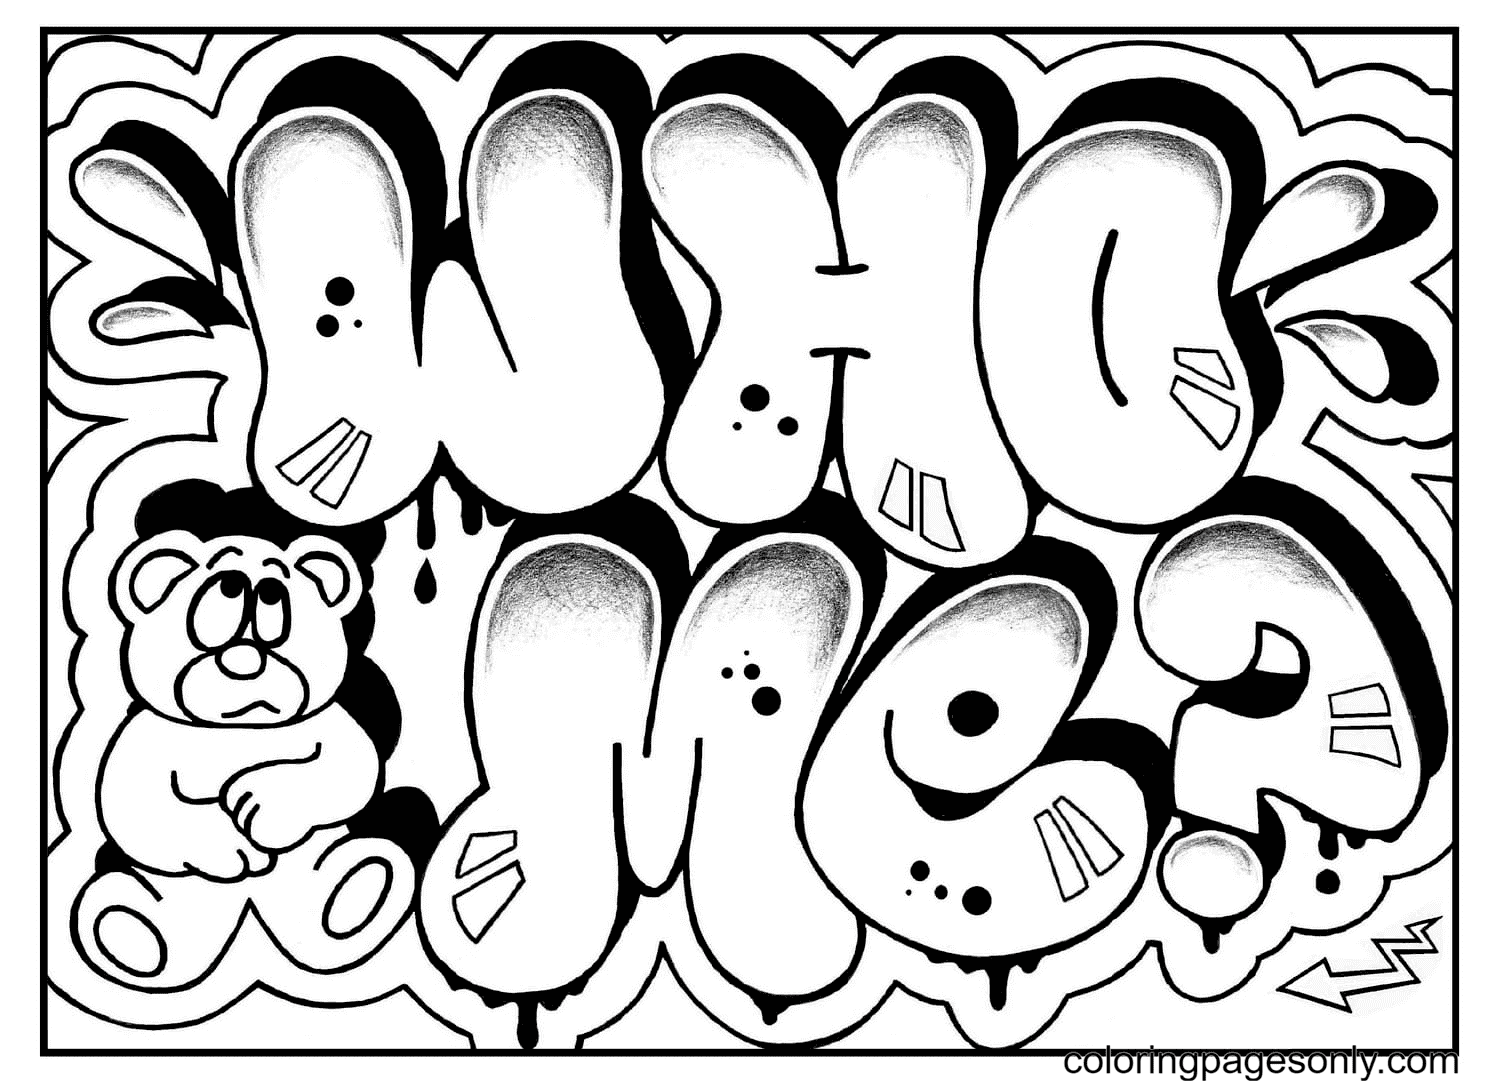 Who Me? Coloring Pages